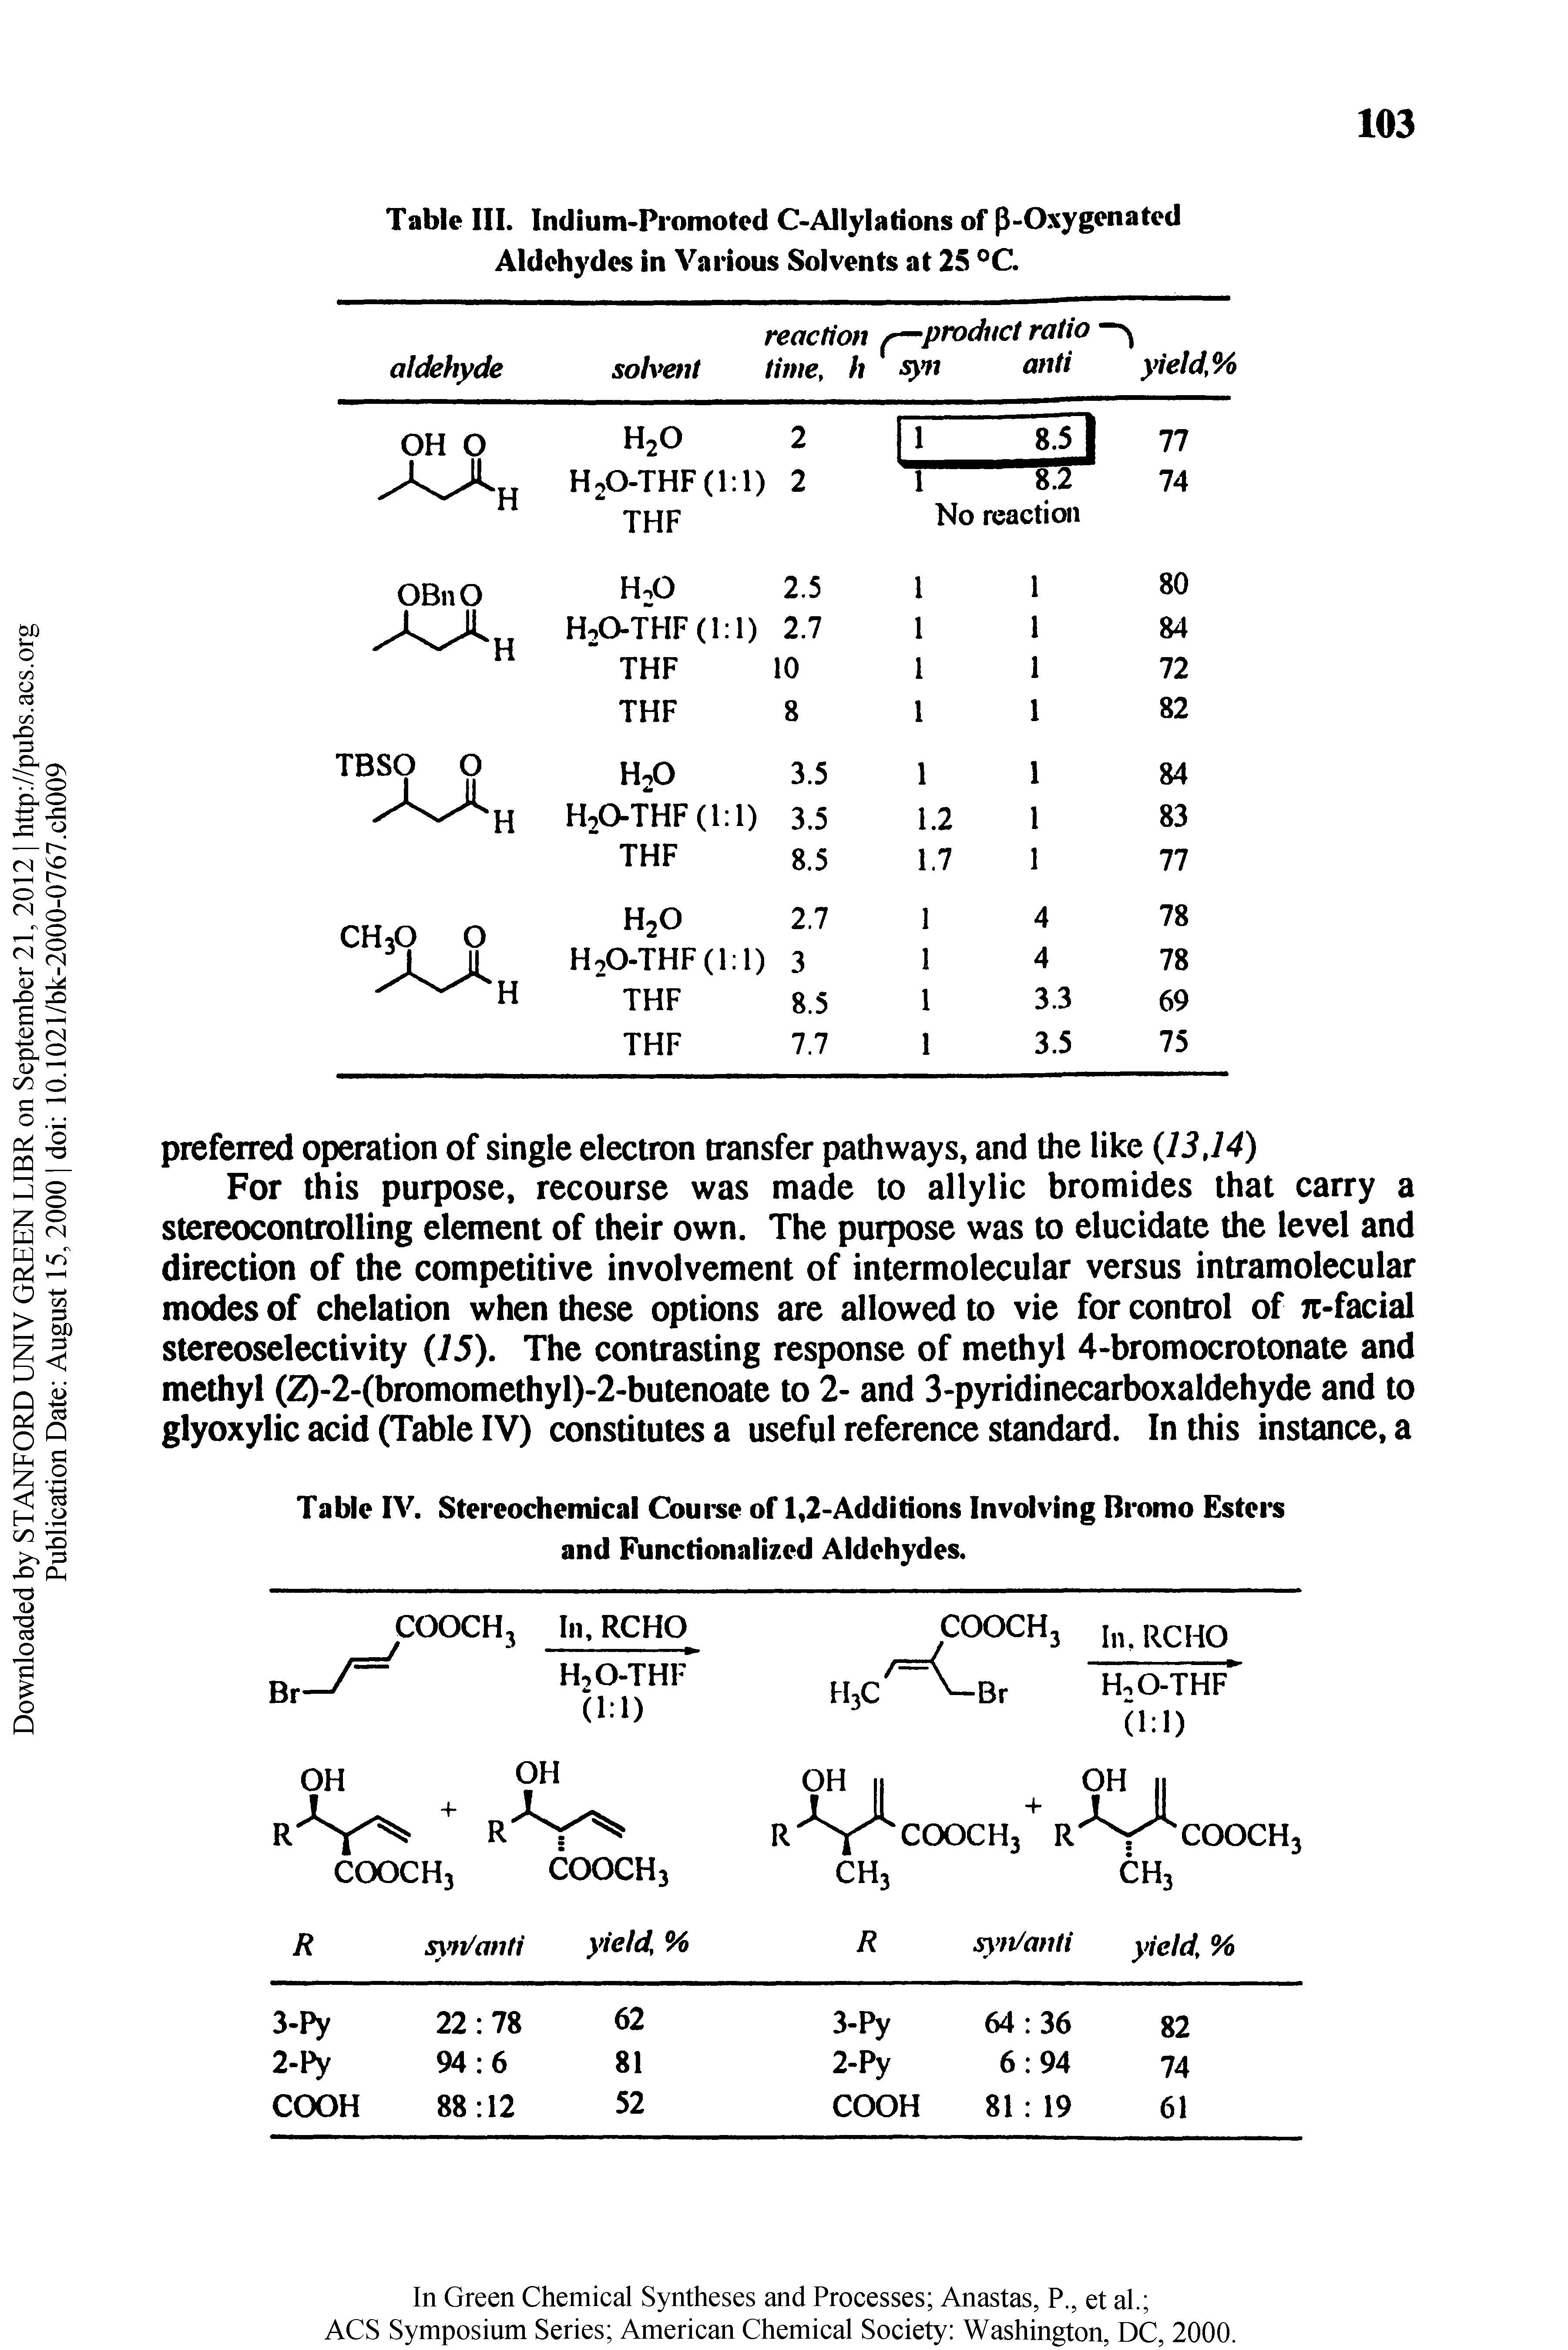 Table IV. Stereochemical Course of 1,2-Additions Involving Bromo Esters and Functionalized Aldehydes.